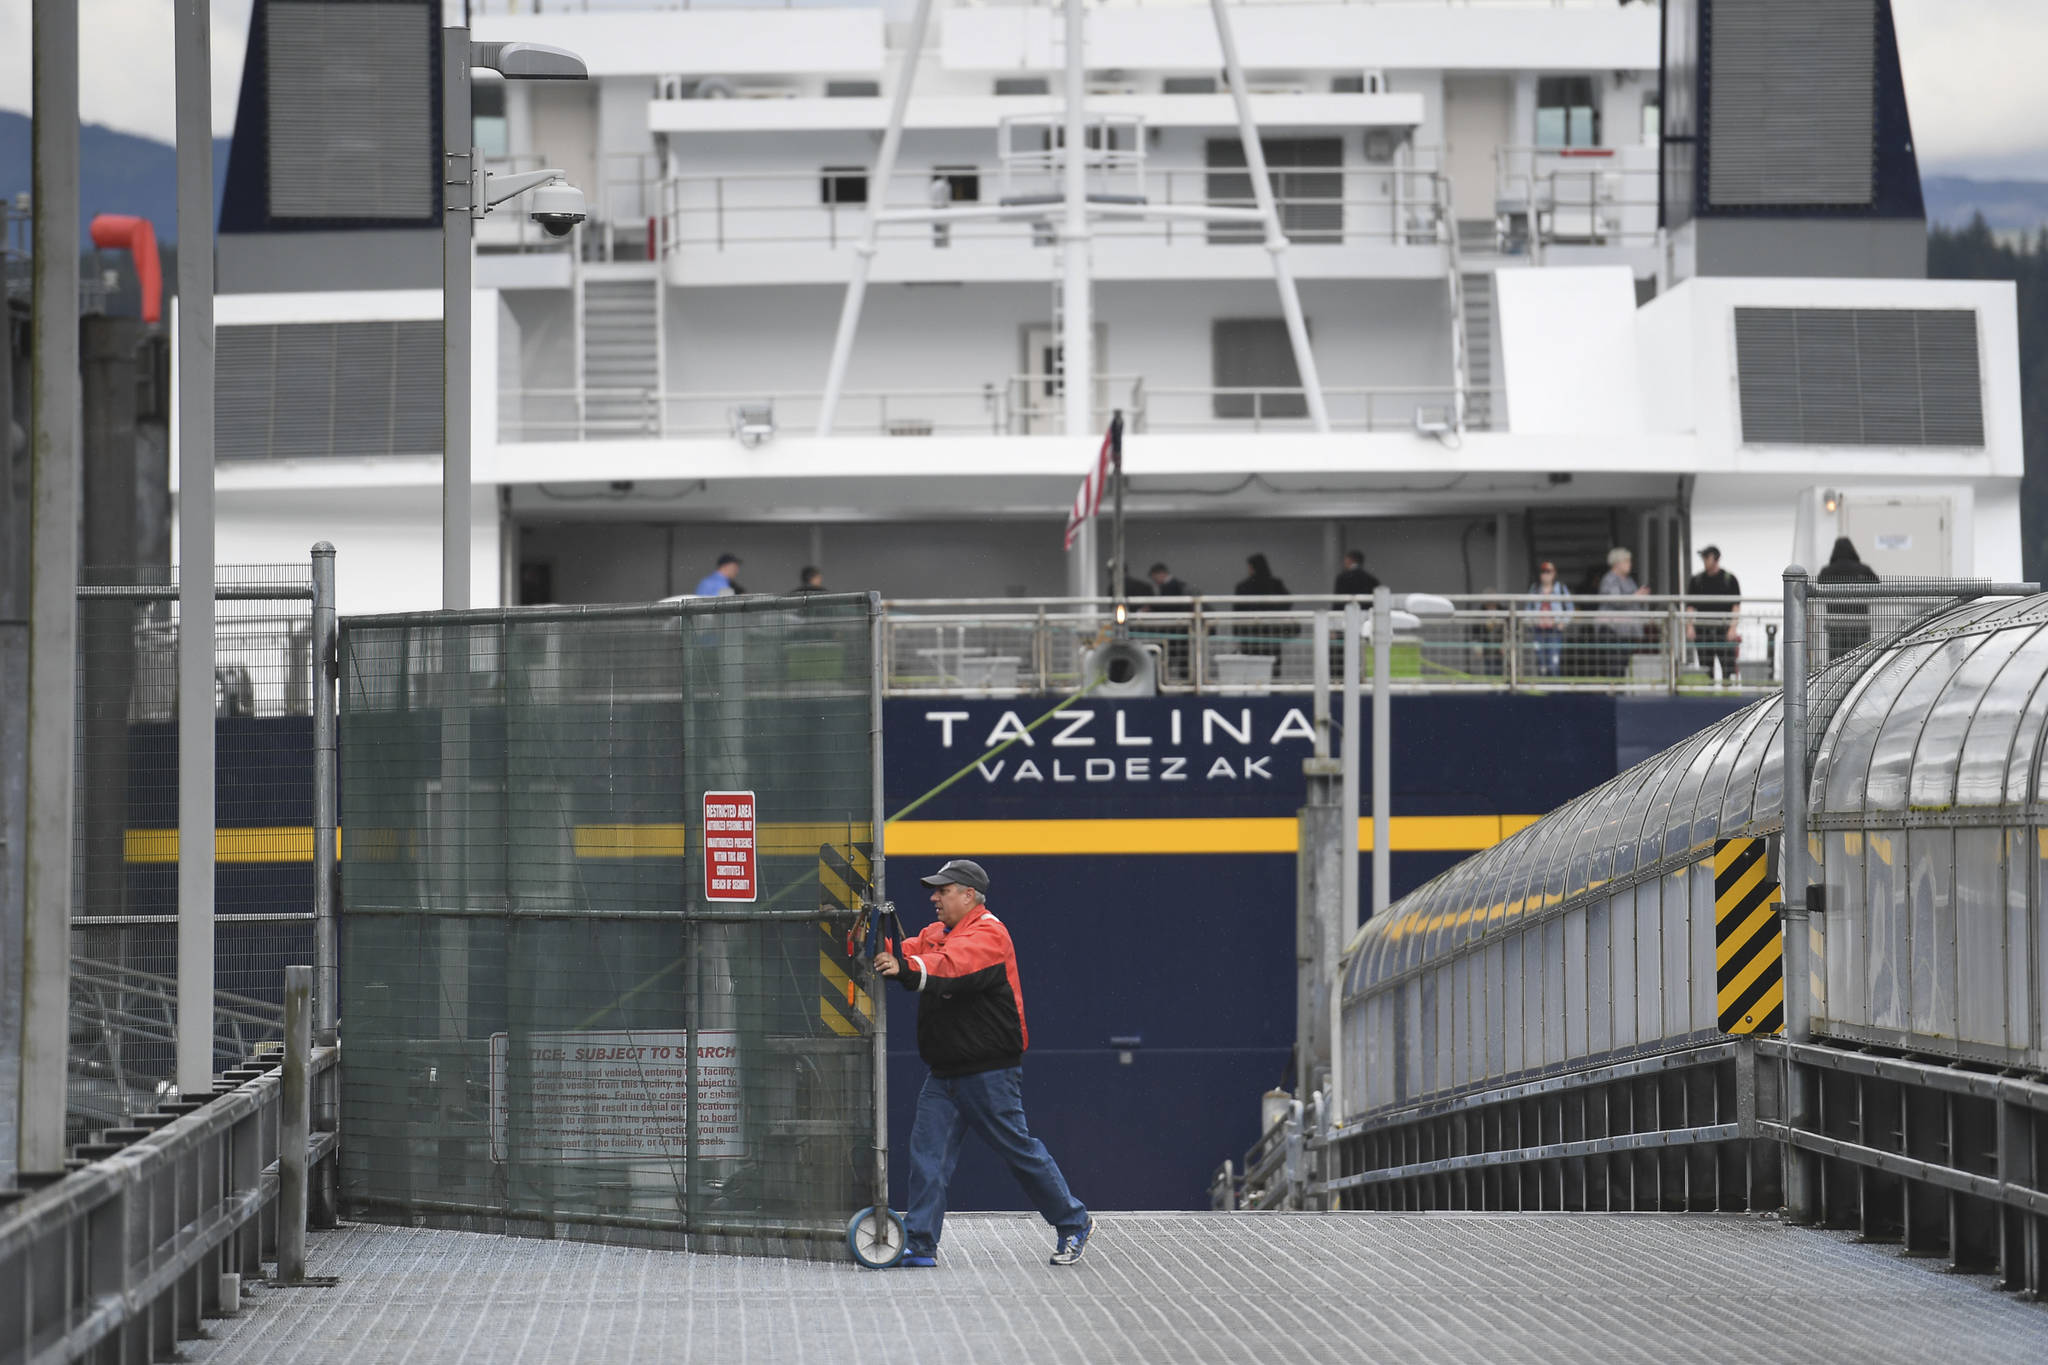 The Alaska Marine Highway System employee opens the vehicle gate after the Tazlina arrives at the Auke Bay Terminal in July 2019. (Michael Penn | Juneau Empire File)